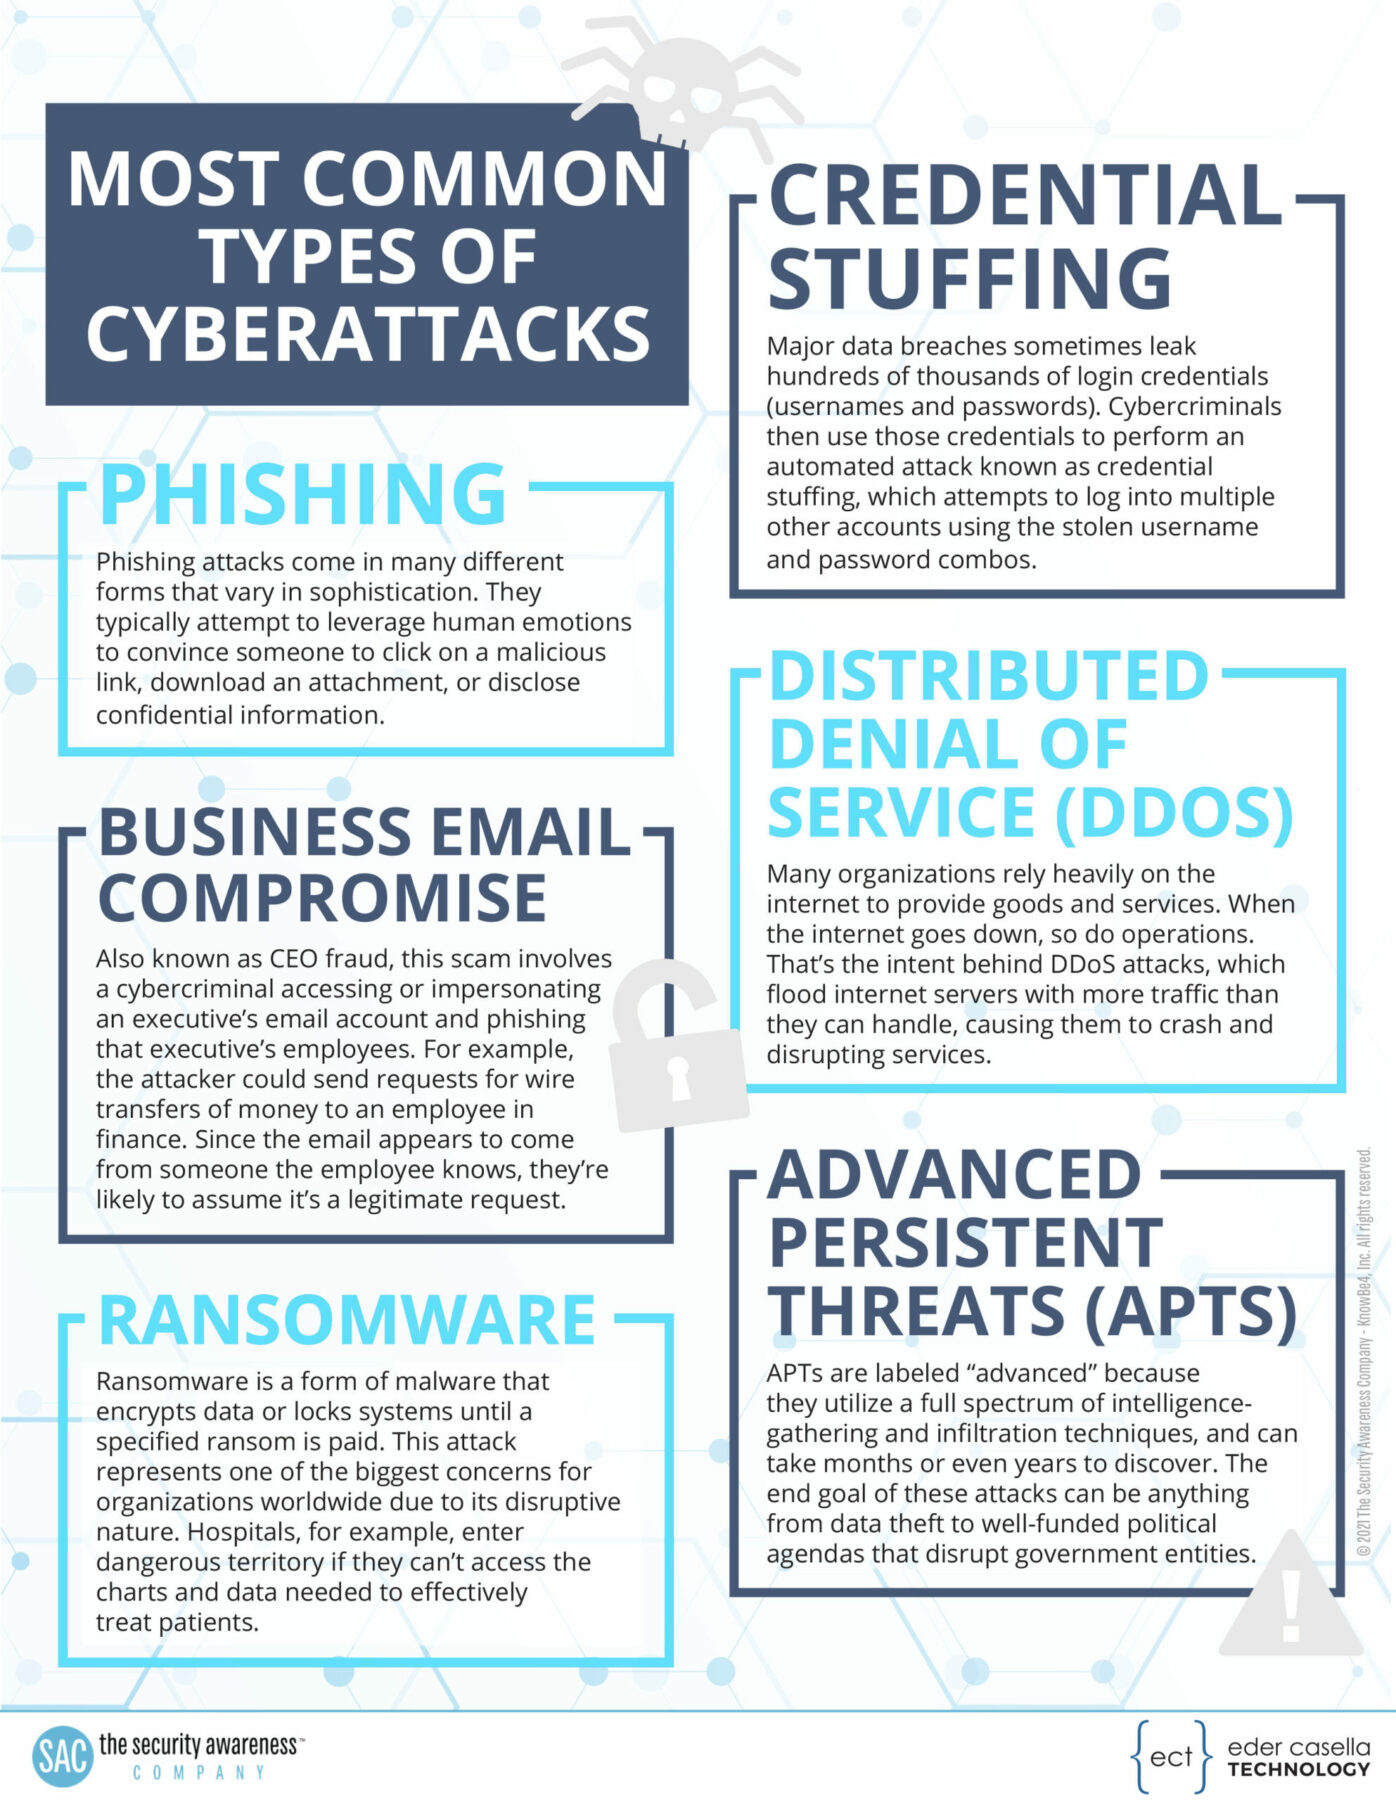 Examples of common cyberattacks including phishing, DDoS, and ransomware.